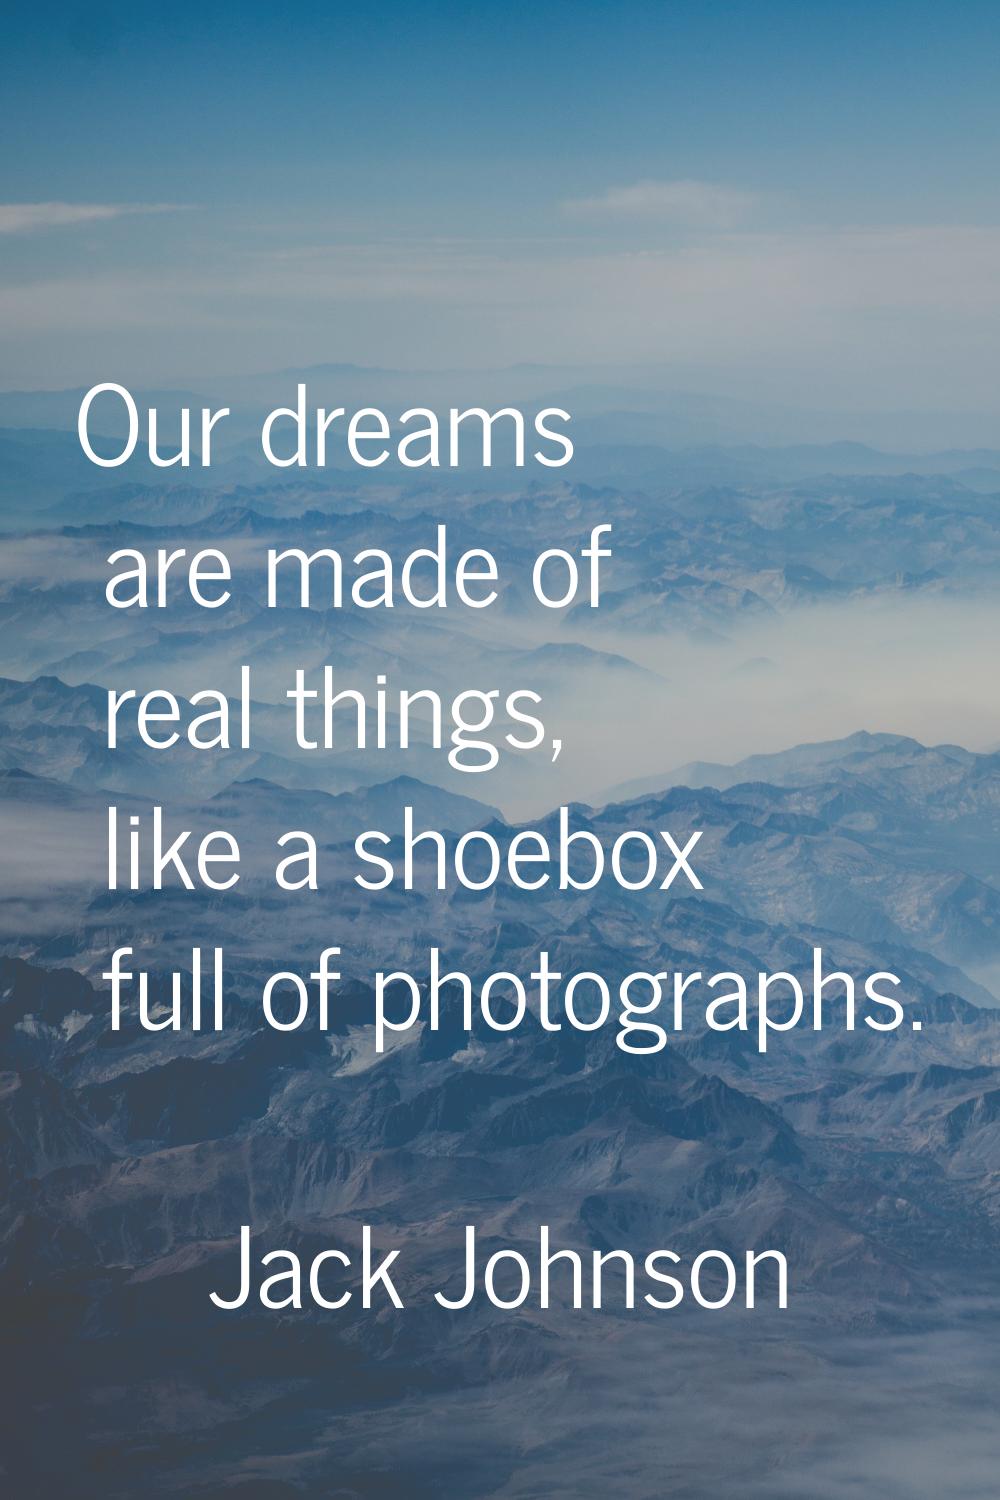 Our dreams are made of real things, like a shoebox full of photographs.